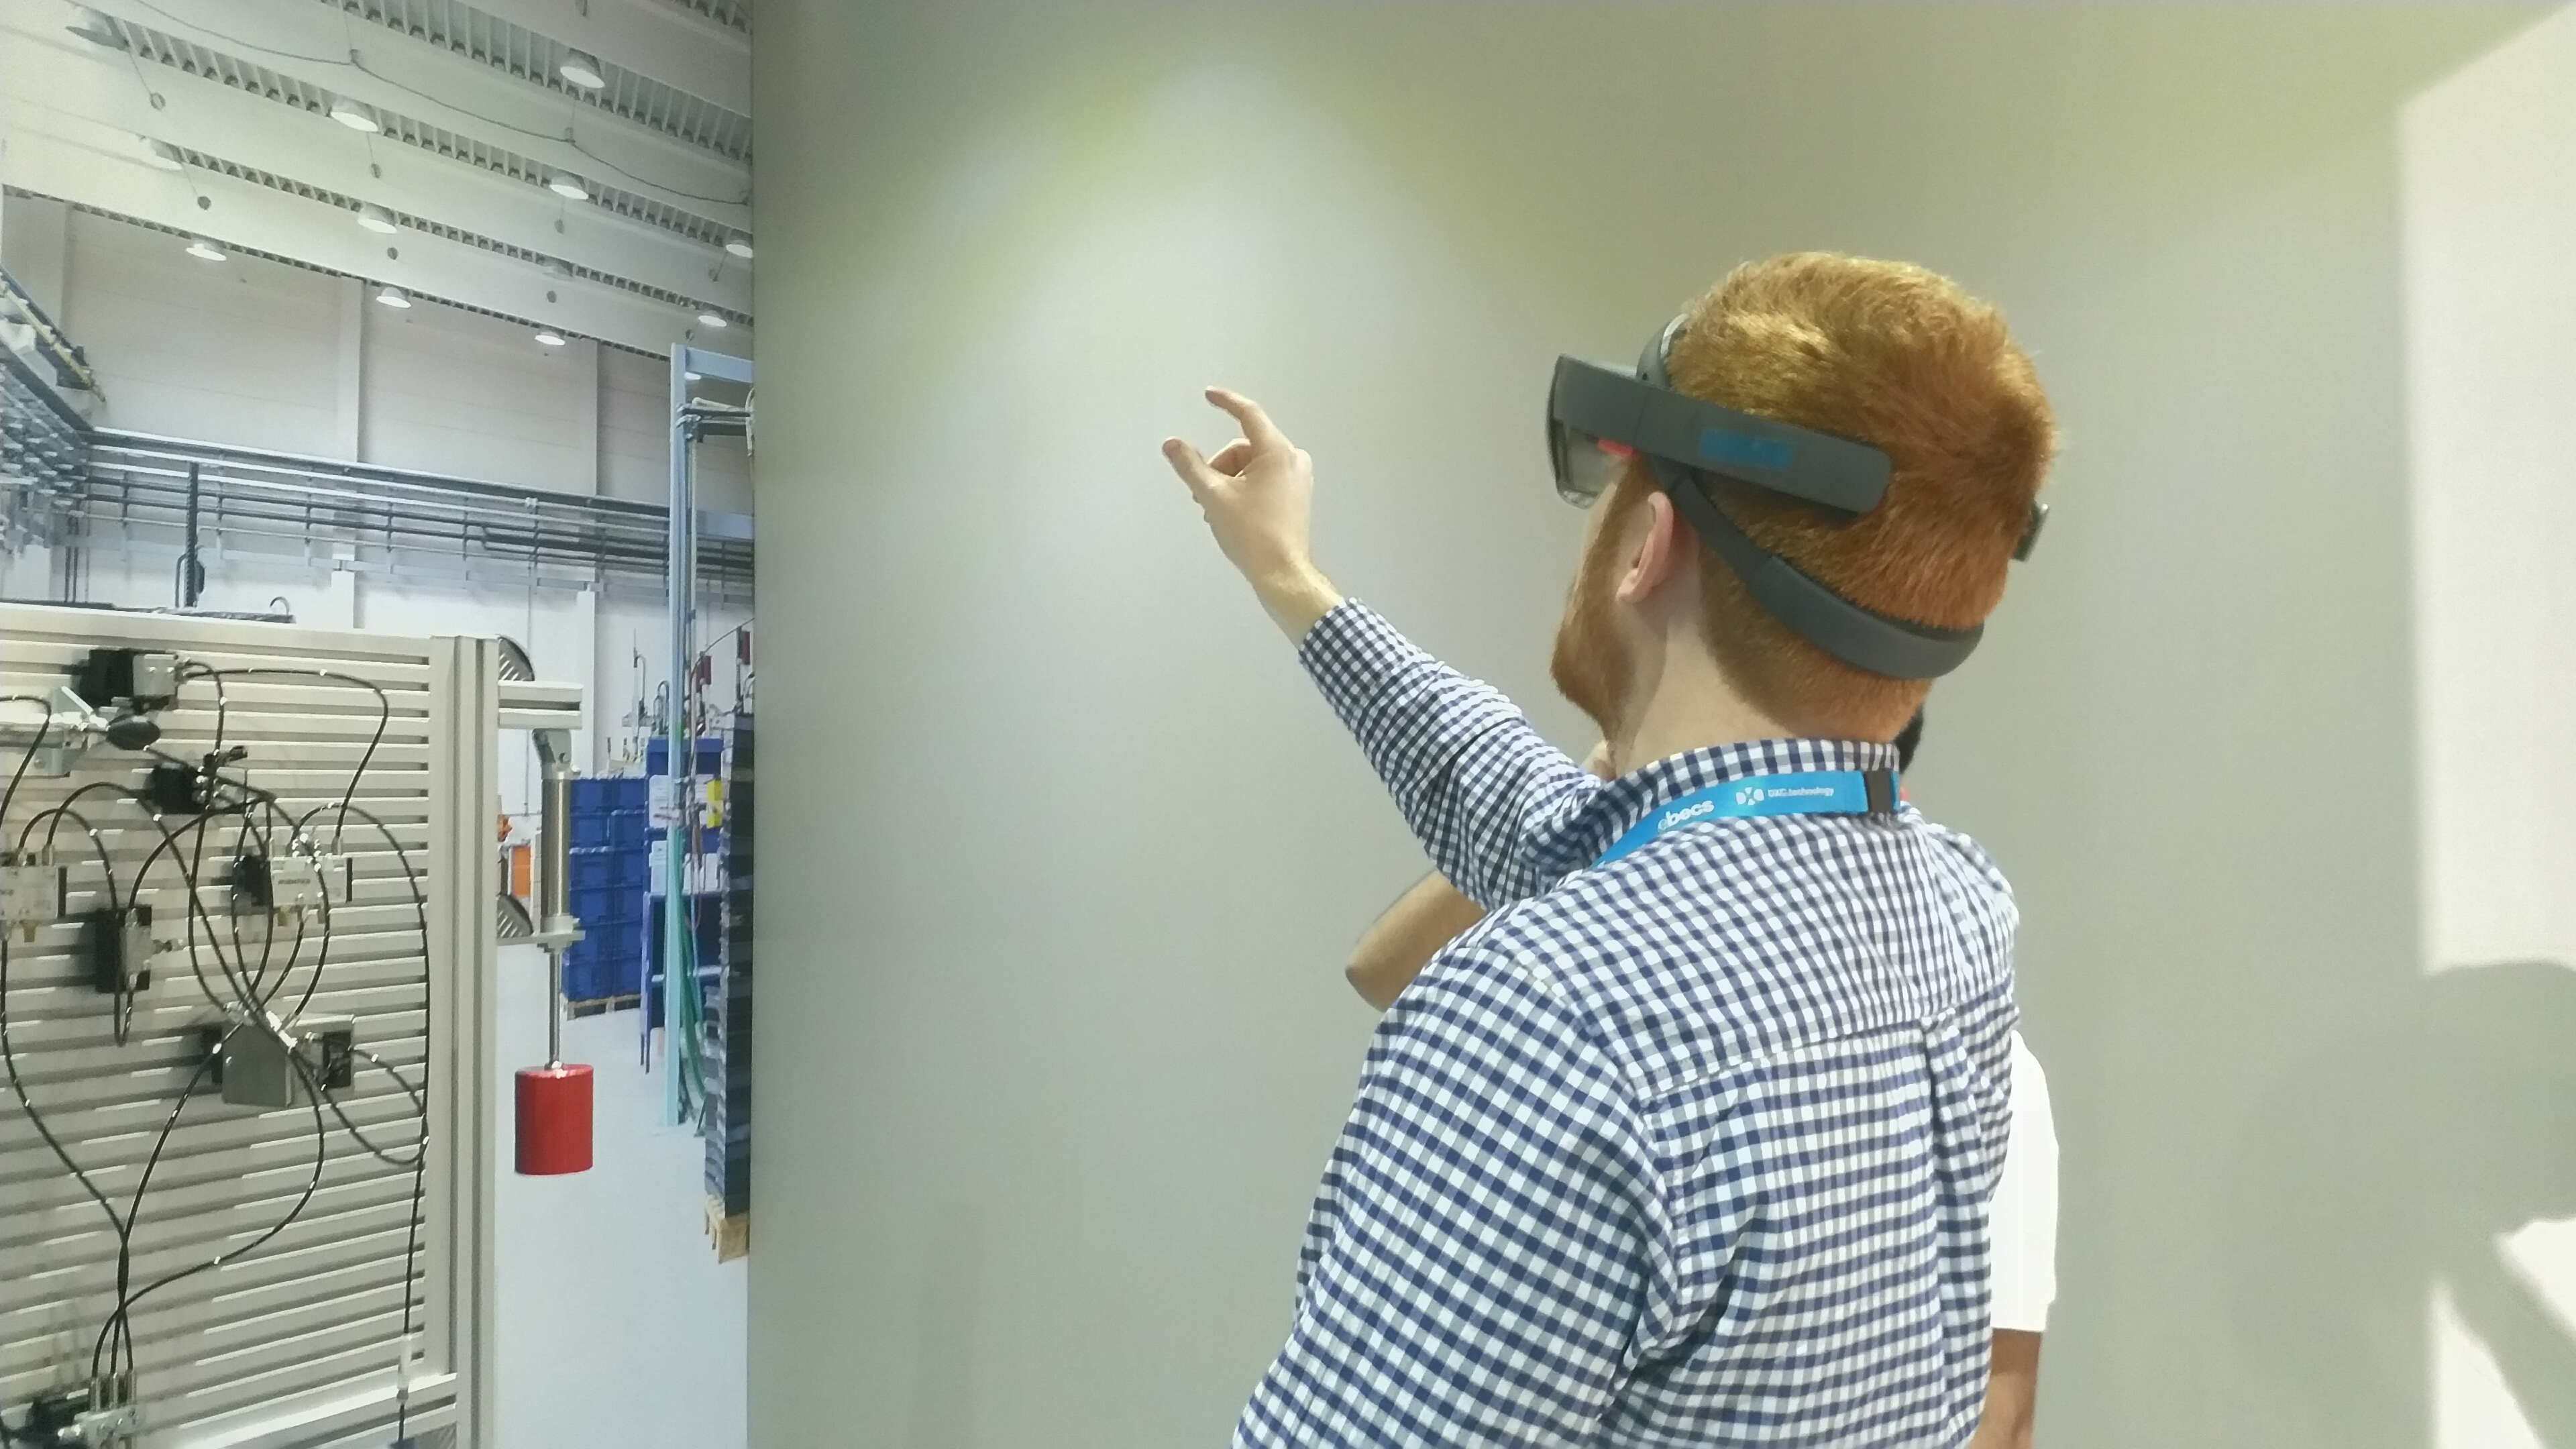 Matthew Champion wearing a HoloLens. He is reaching into the air with his index finger and thumb pinching in the air.